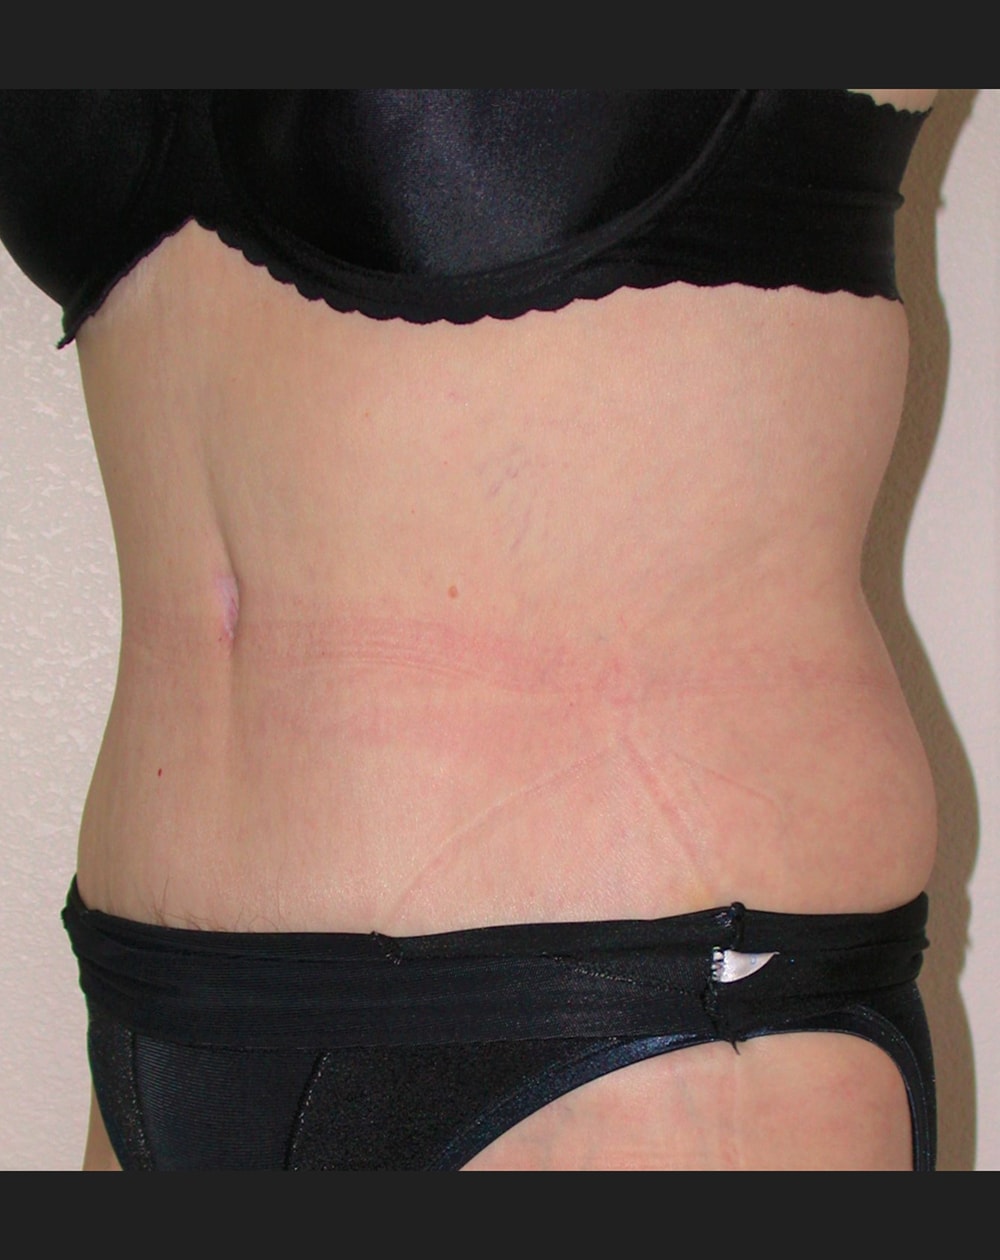 Patient E Body Builder - 6 month Post-Operative Tummy Tuck Lateral